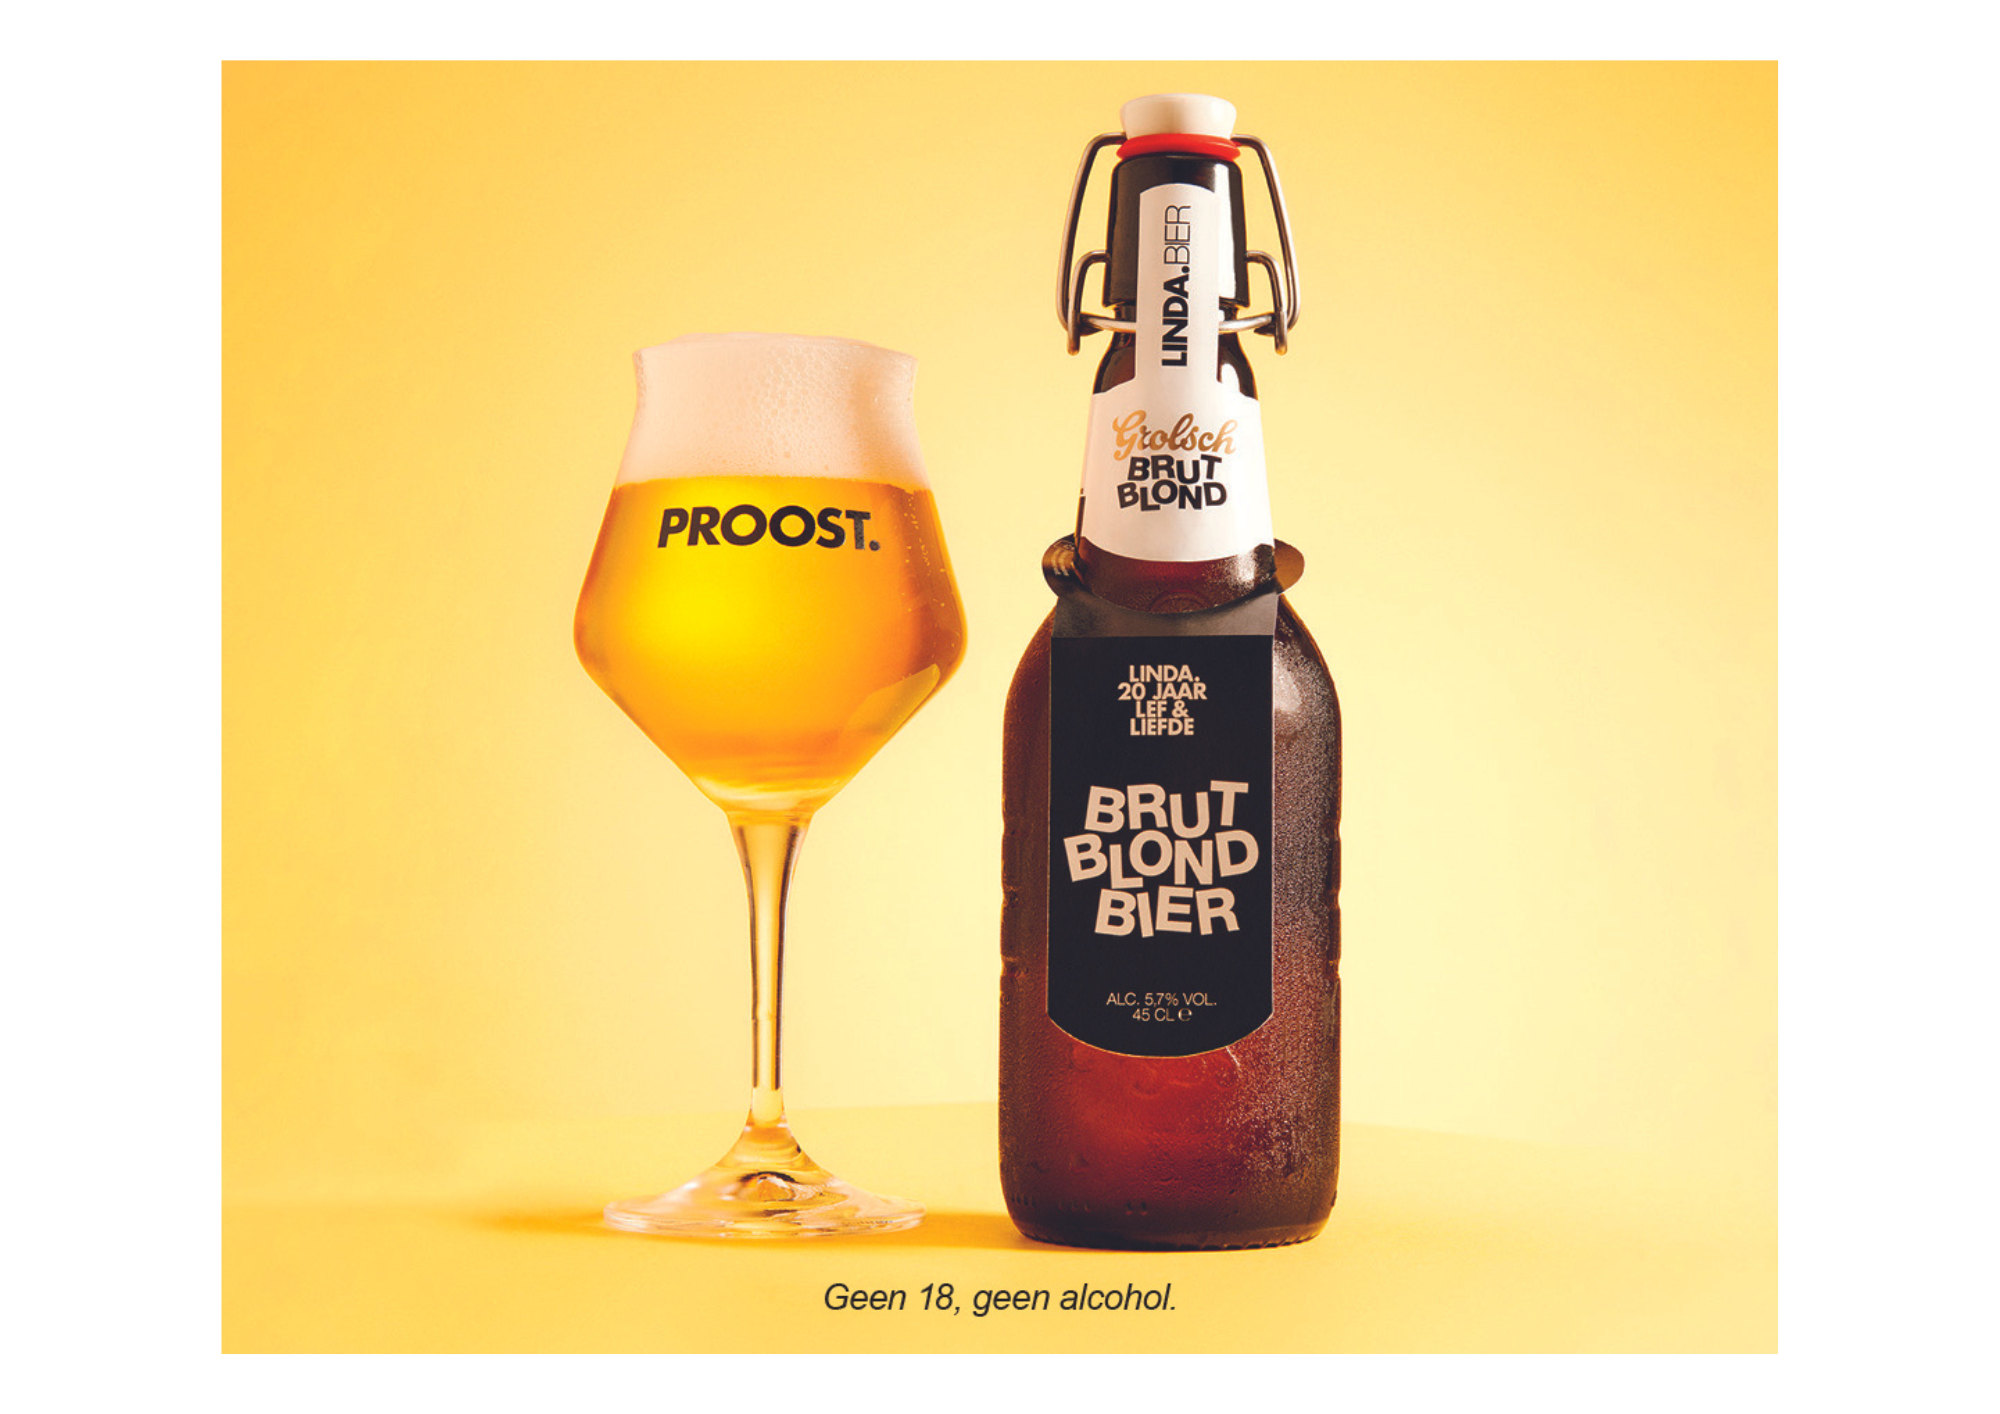  LINDA. Launches LINDA.BEER in partnership with Grolsch